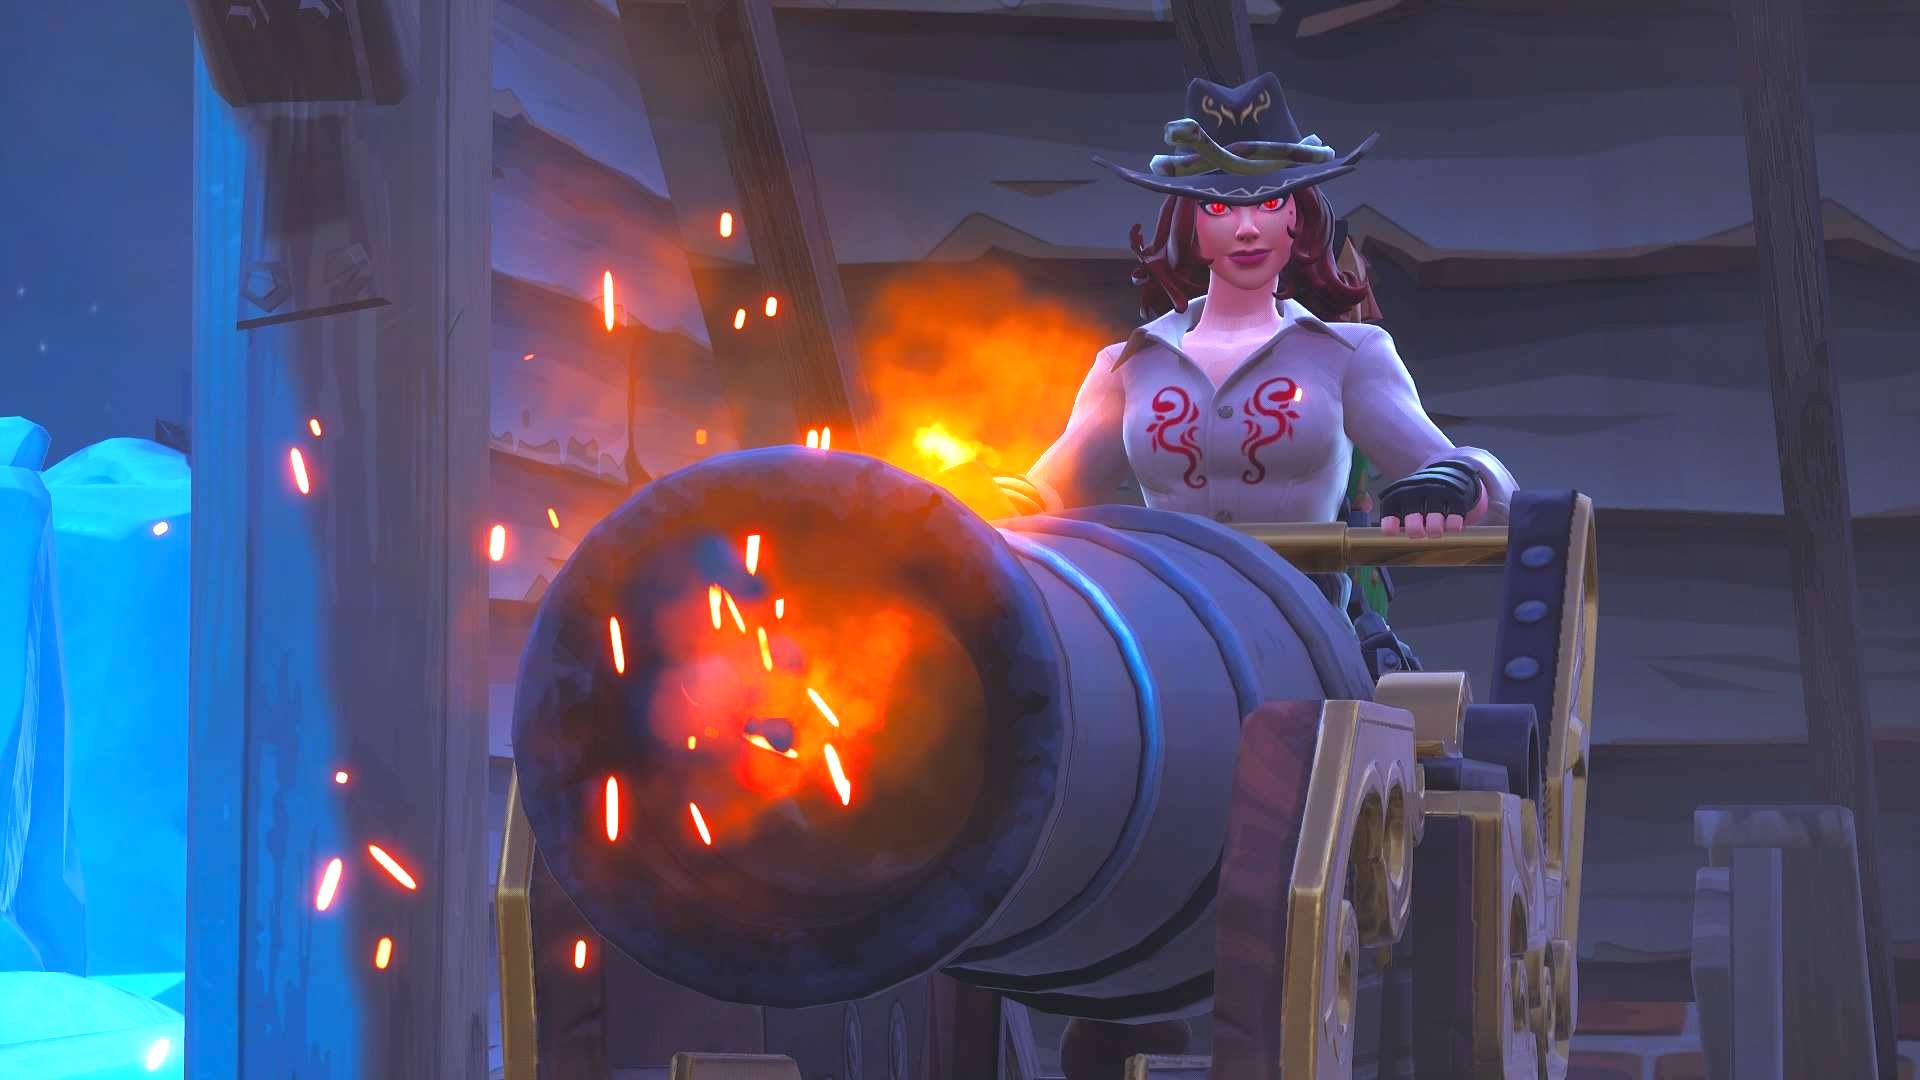 fortnite season 8 adds cannons here s every location you can find them - fortnite wallpaper season 8 cool